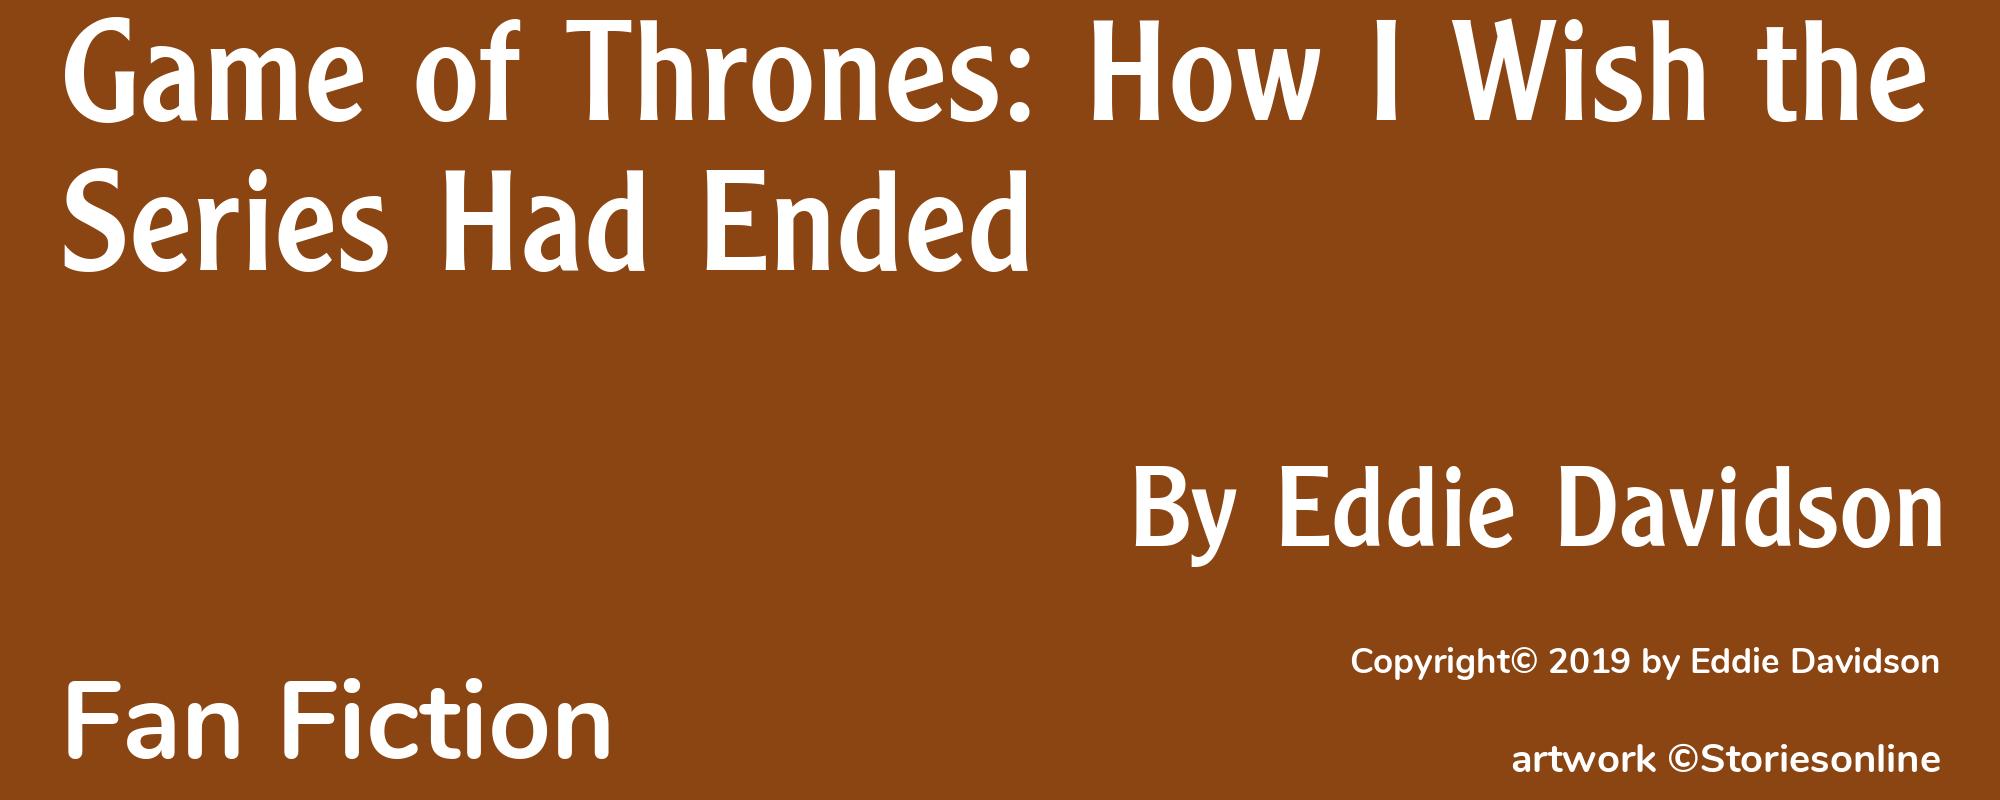 Game of Thrones: How I Wish the Series Had Ended - Cover